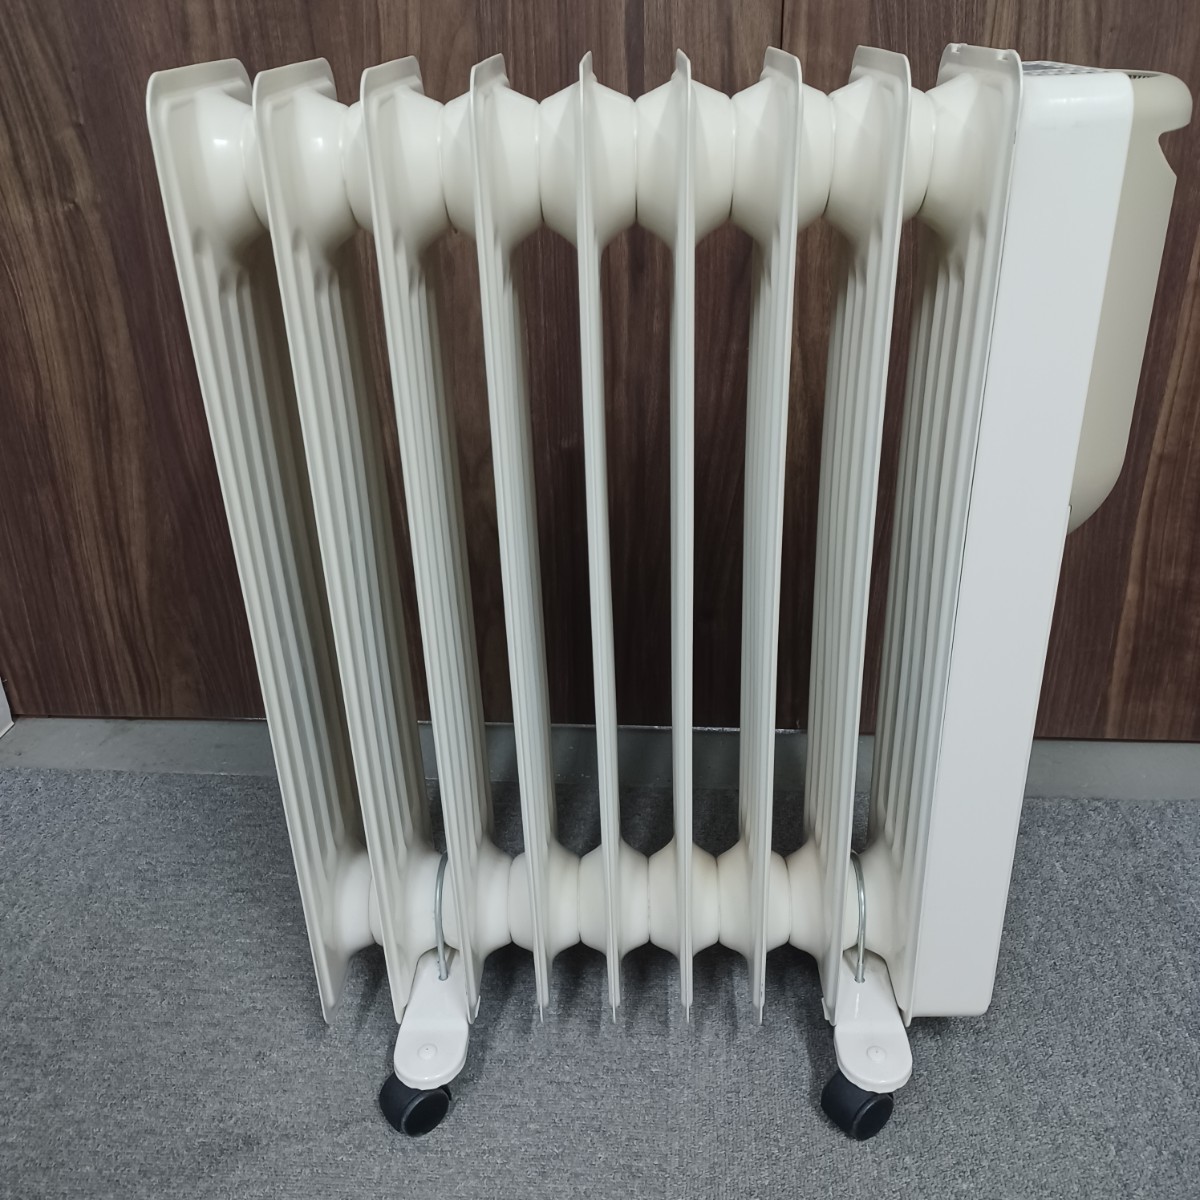 .) Toyotomi oil radiator heater EOH-1291D oil heater 7 tatami Germany made timer attaching toyotomi home heater safety guard attaching (230311)